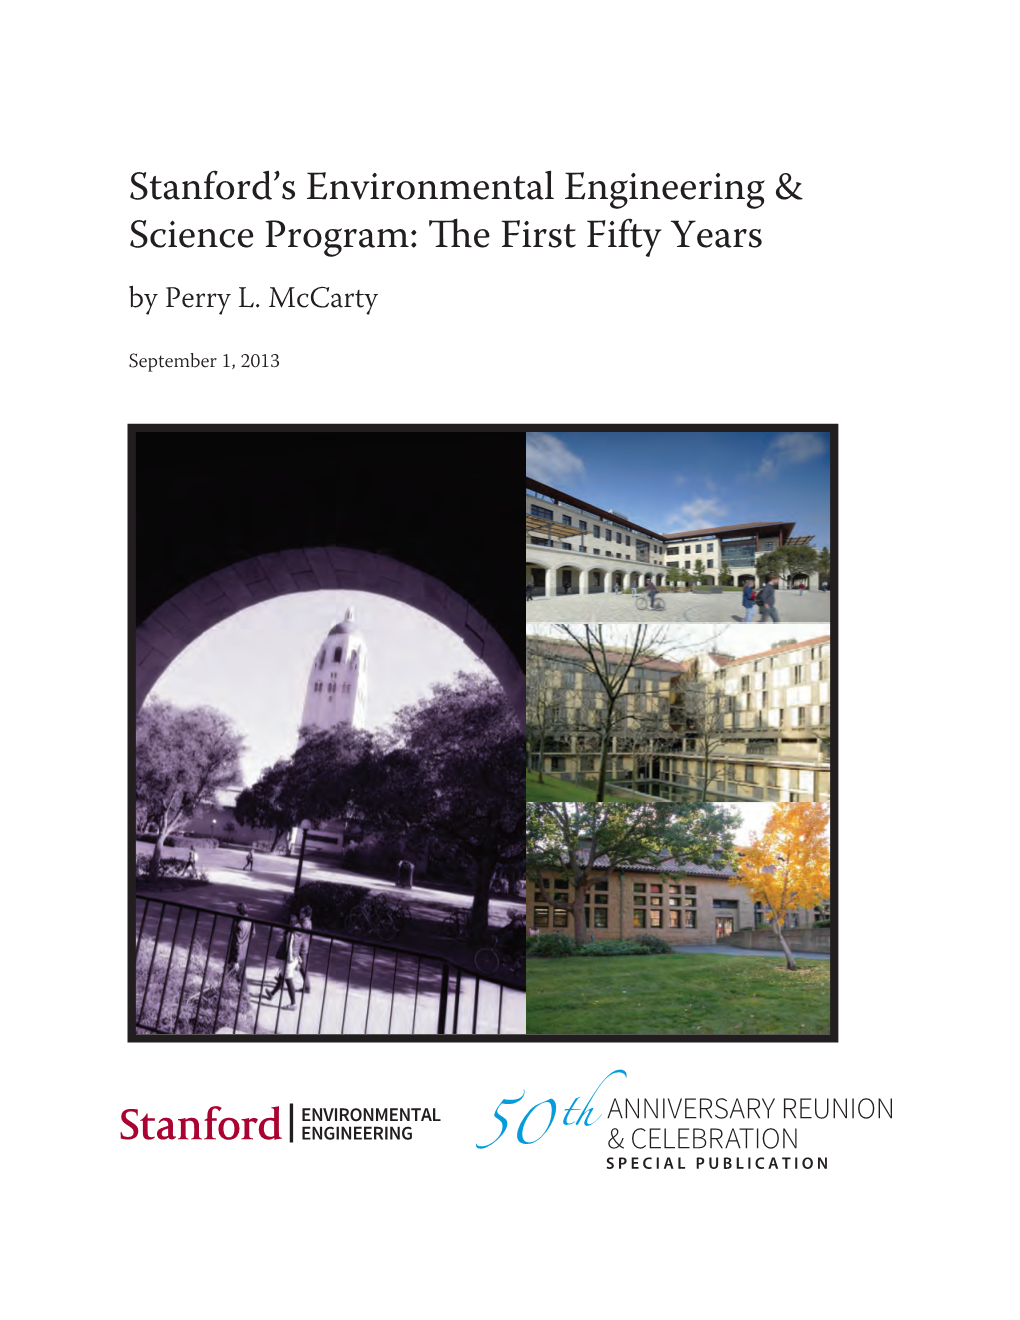 Stanford's Environmental Engineering and Science